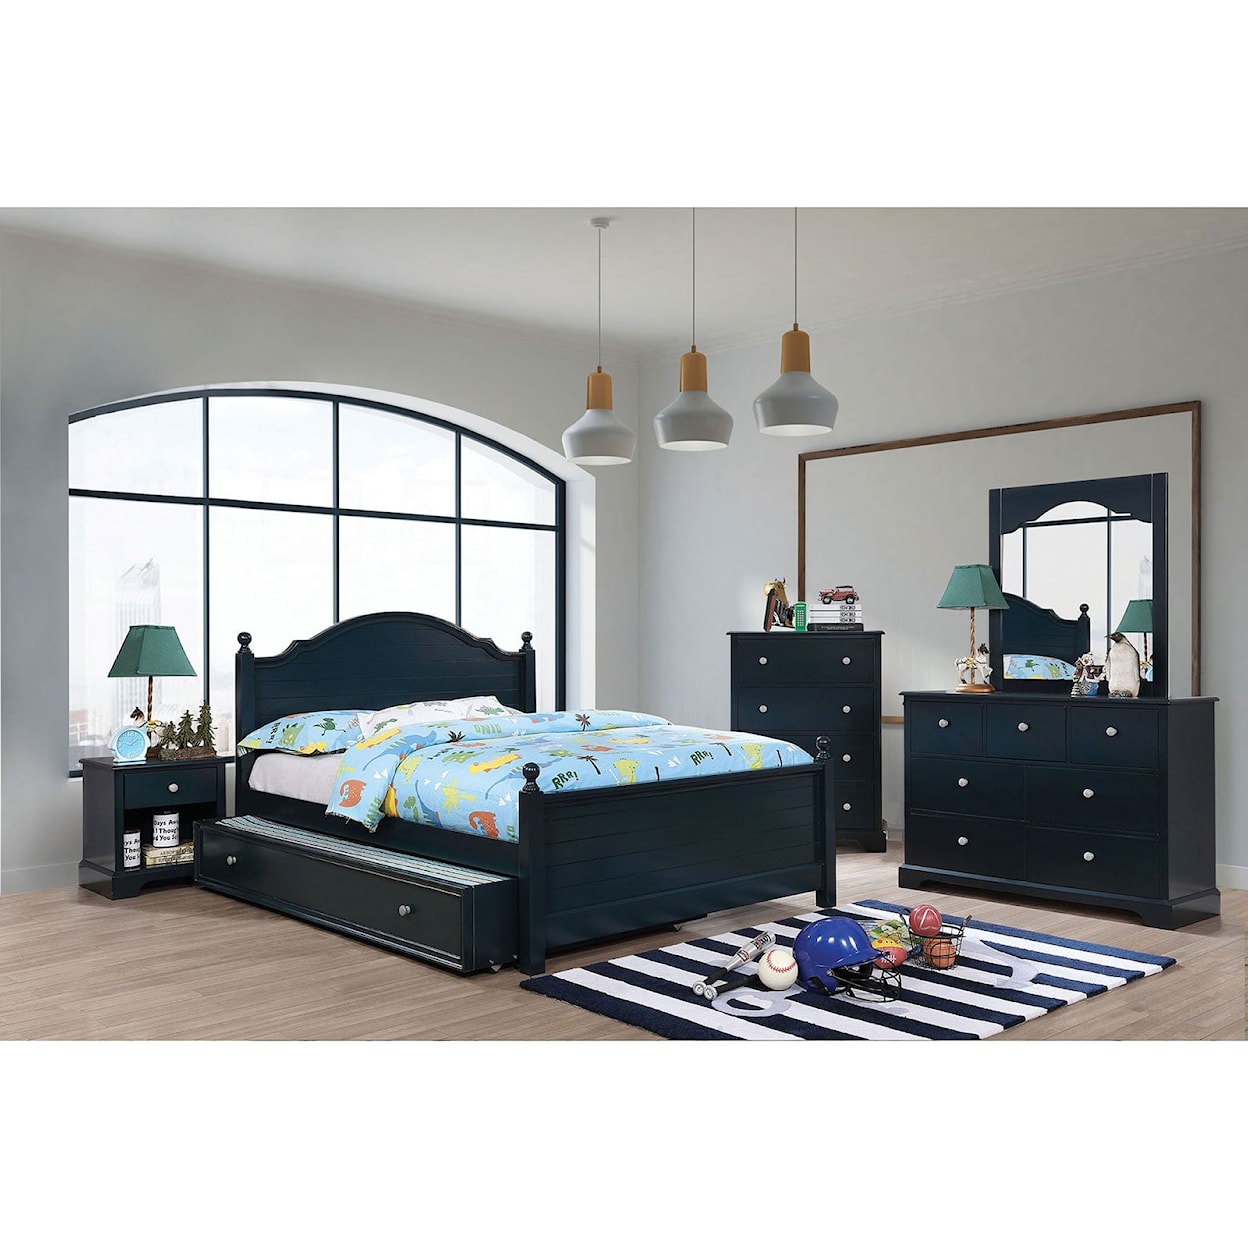 Furniture of America Diane 4 Pc. Twin Bedroom Set w/ Trundle